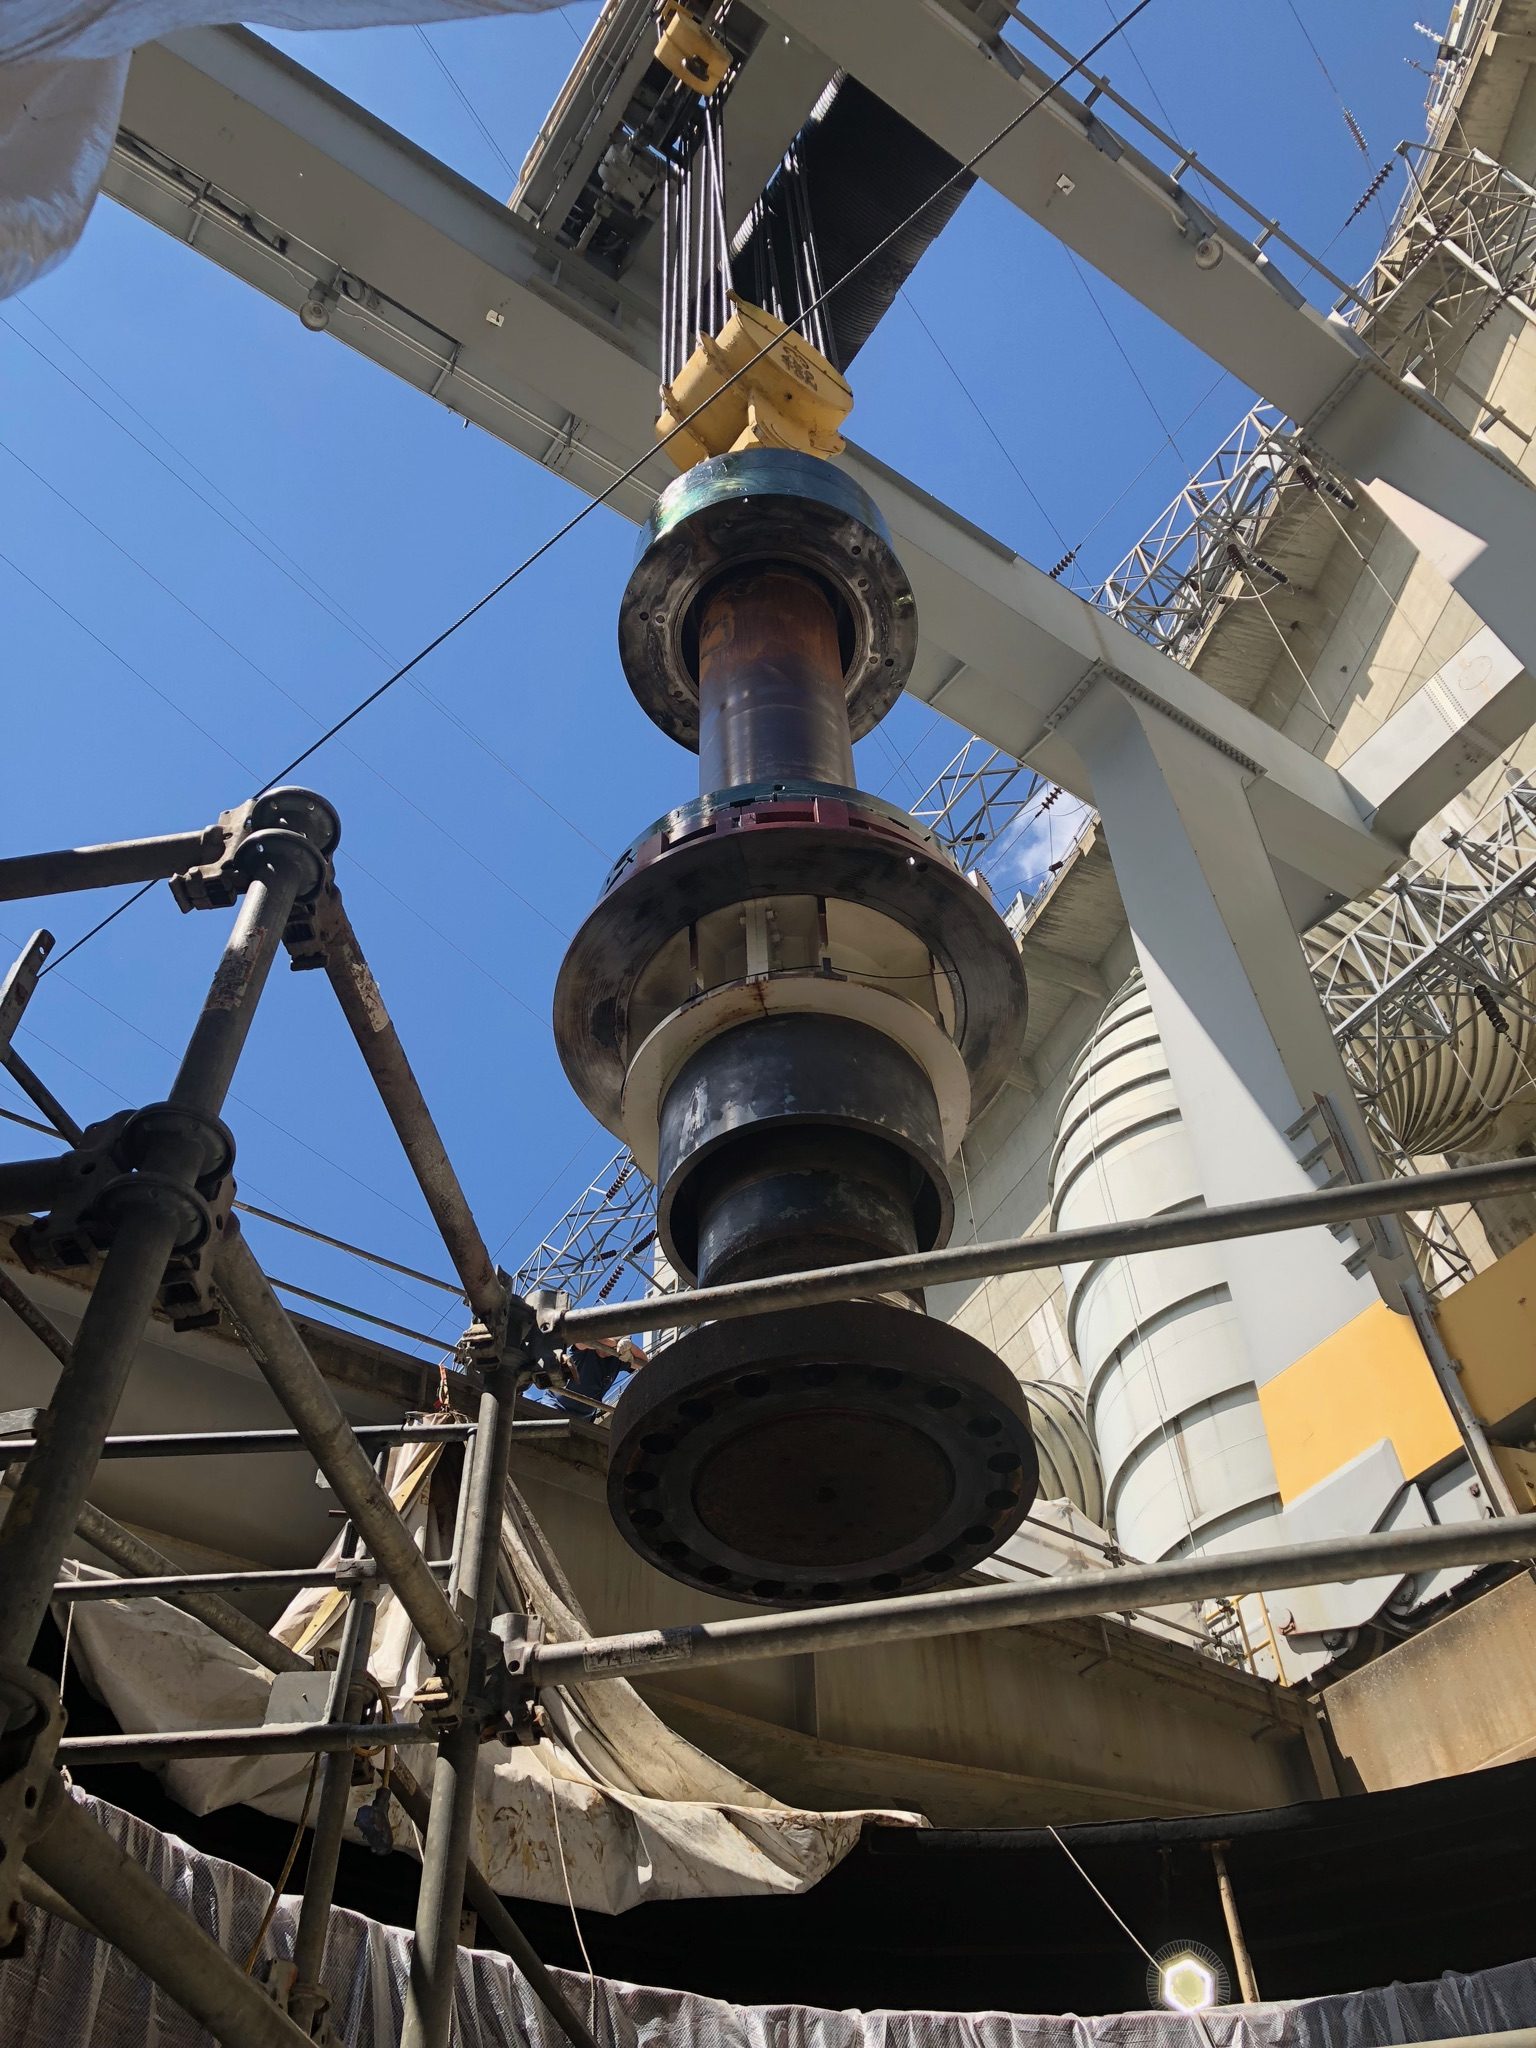 Large turbine being installed as part of a long-term maintenance project.